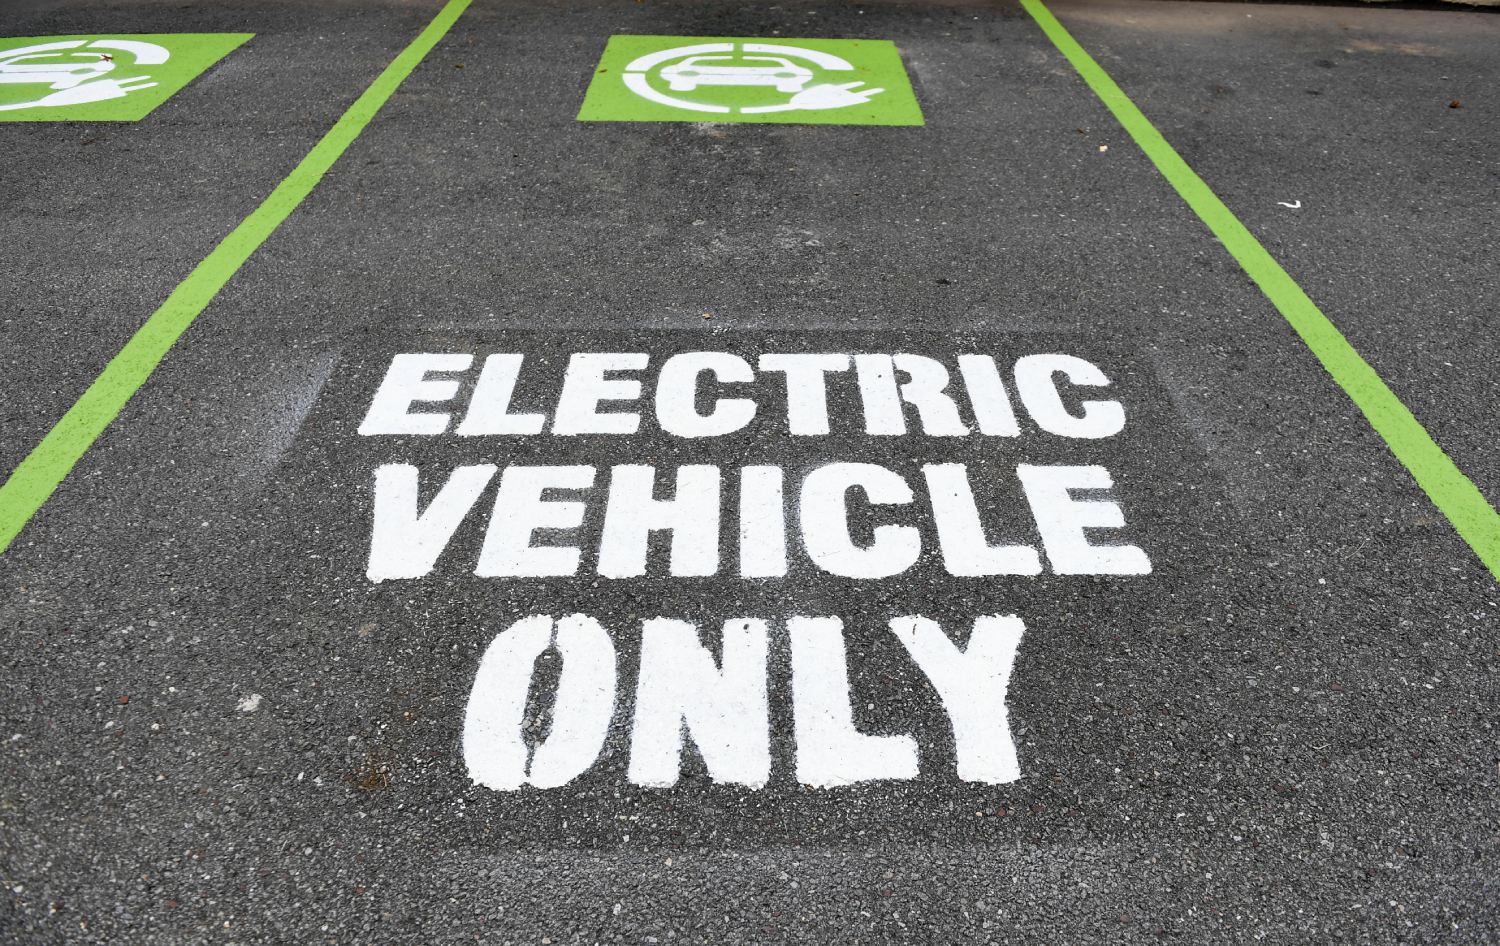 All of the electric vehicles that come with free charging